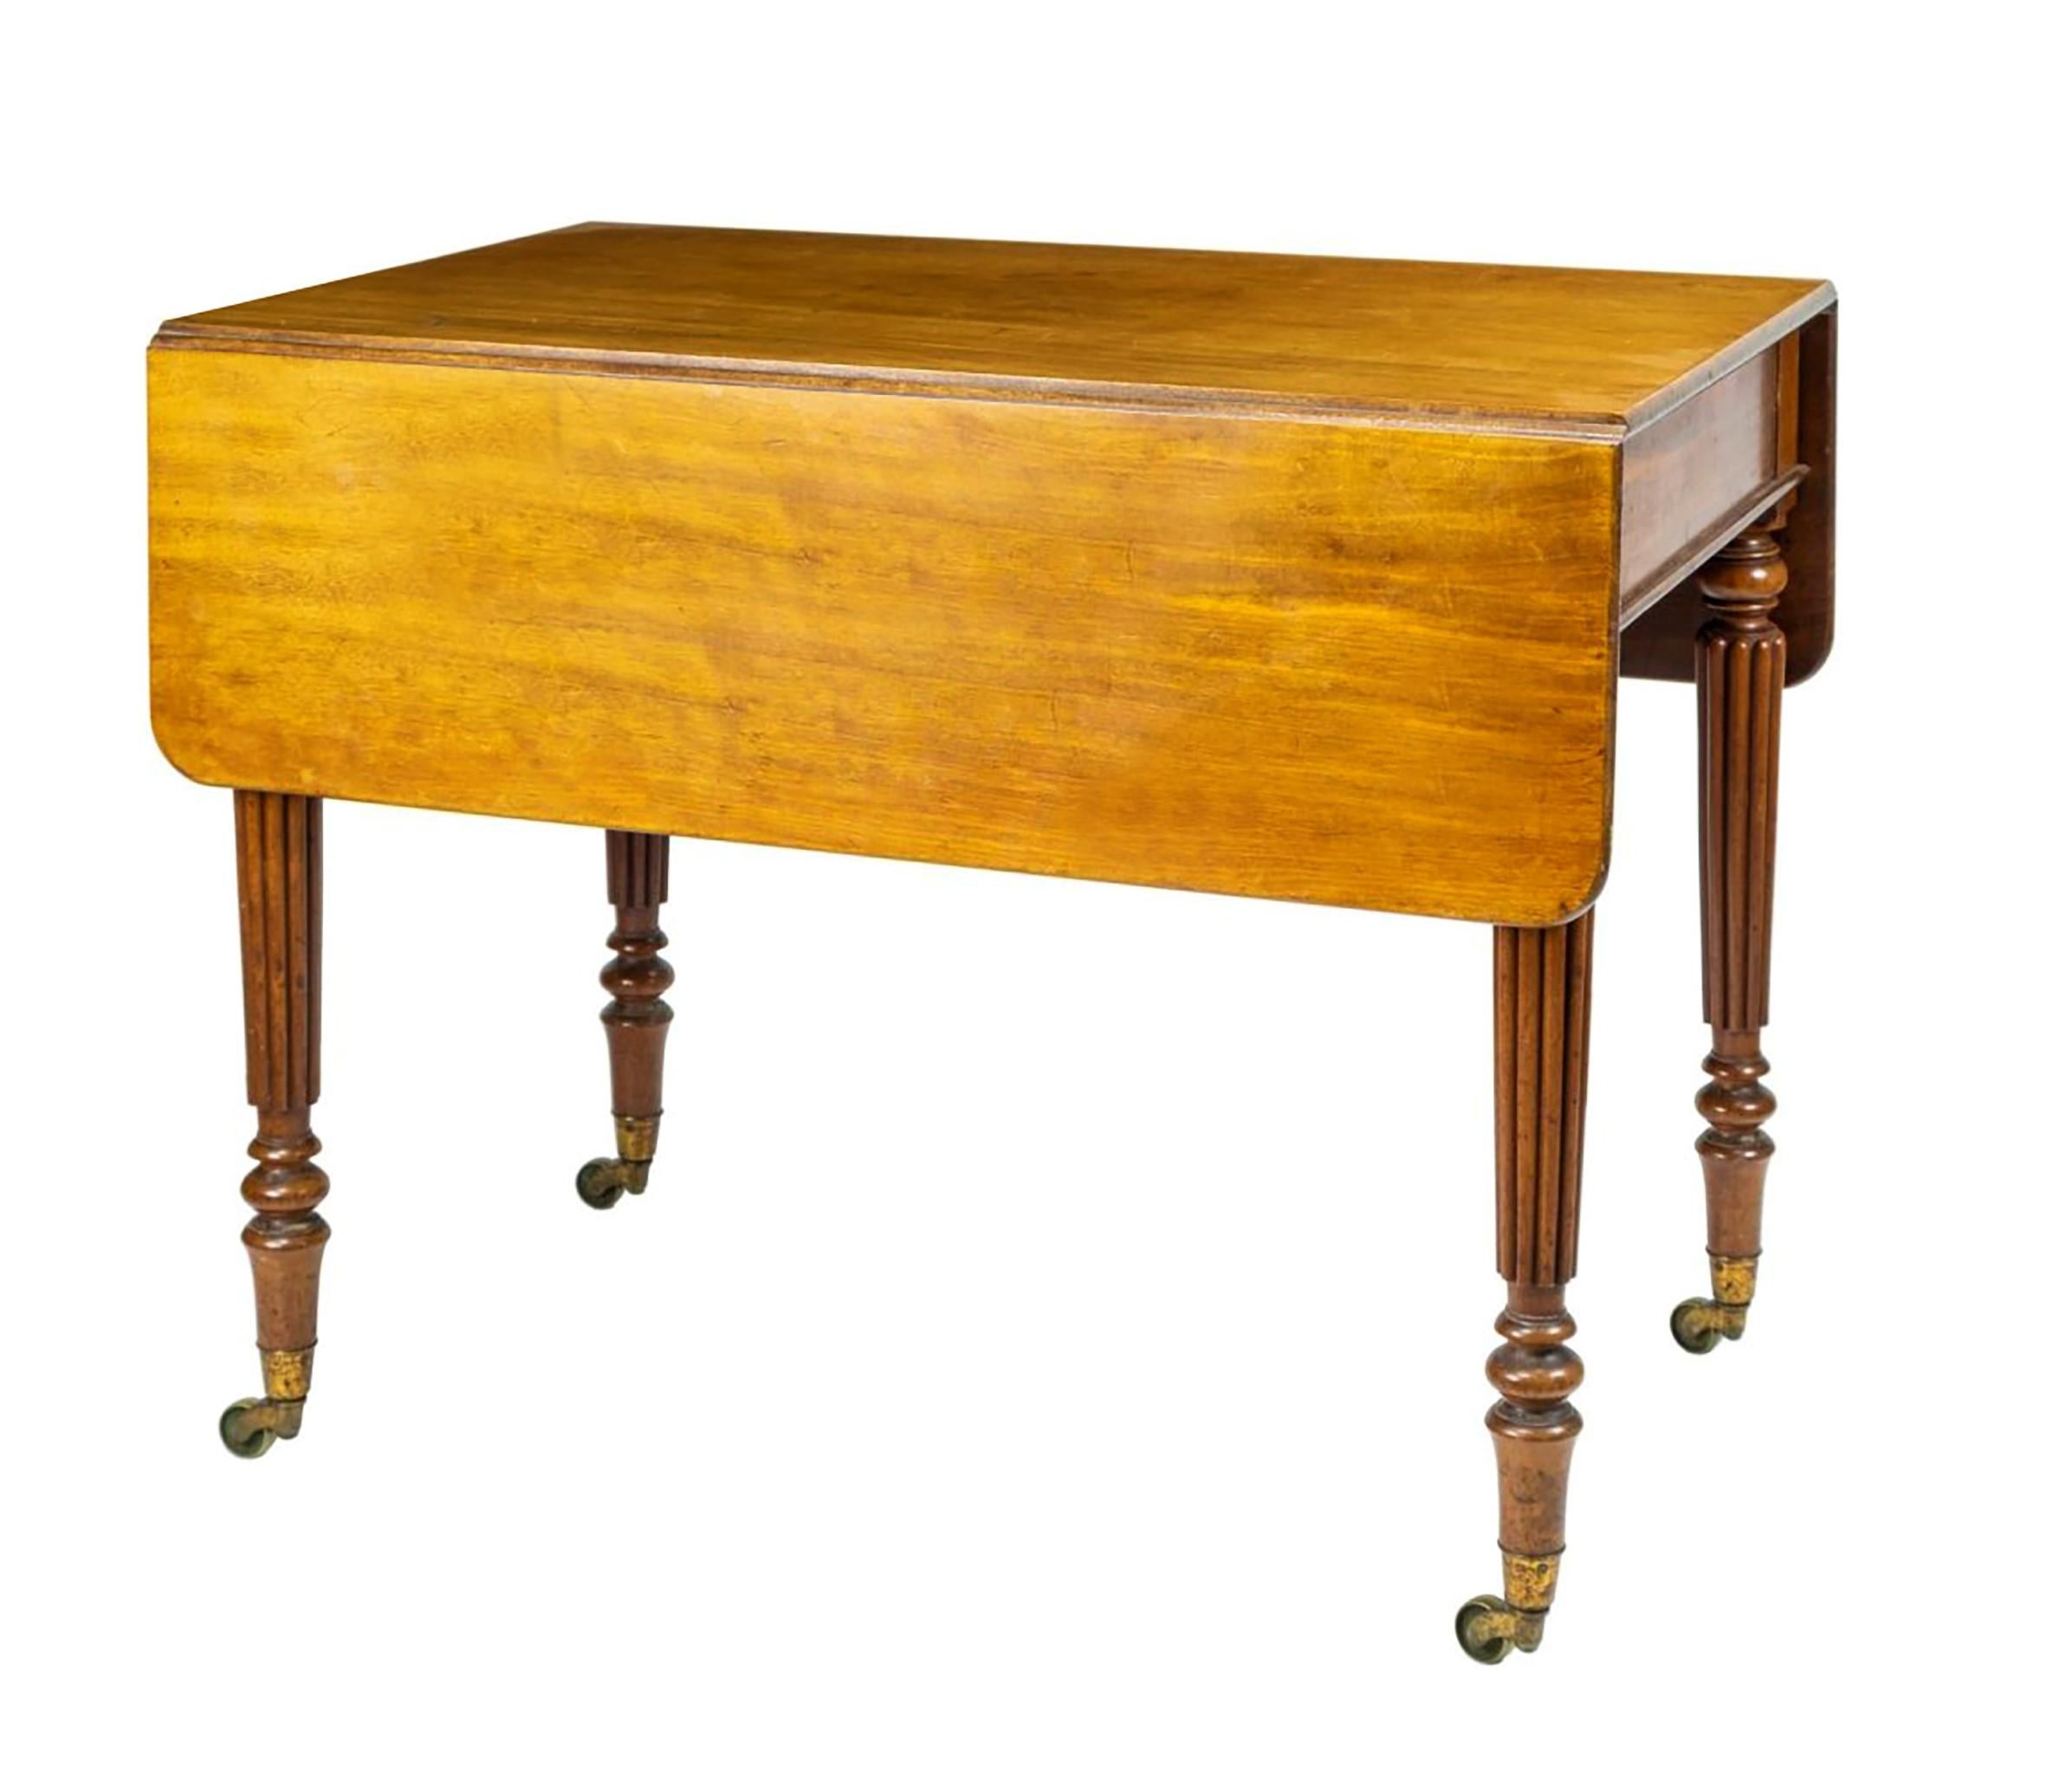 George IV George iv Mahogany Pembroke Table by Gillows